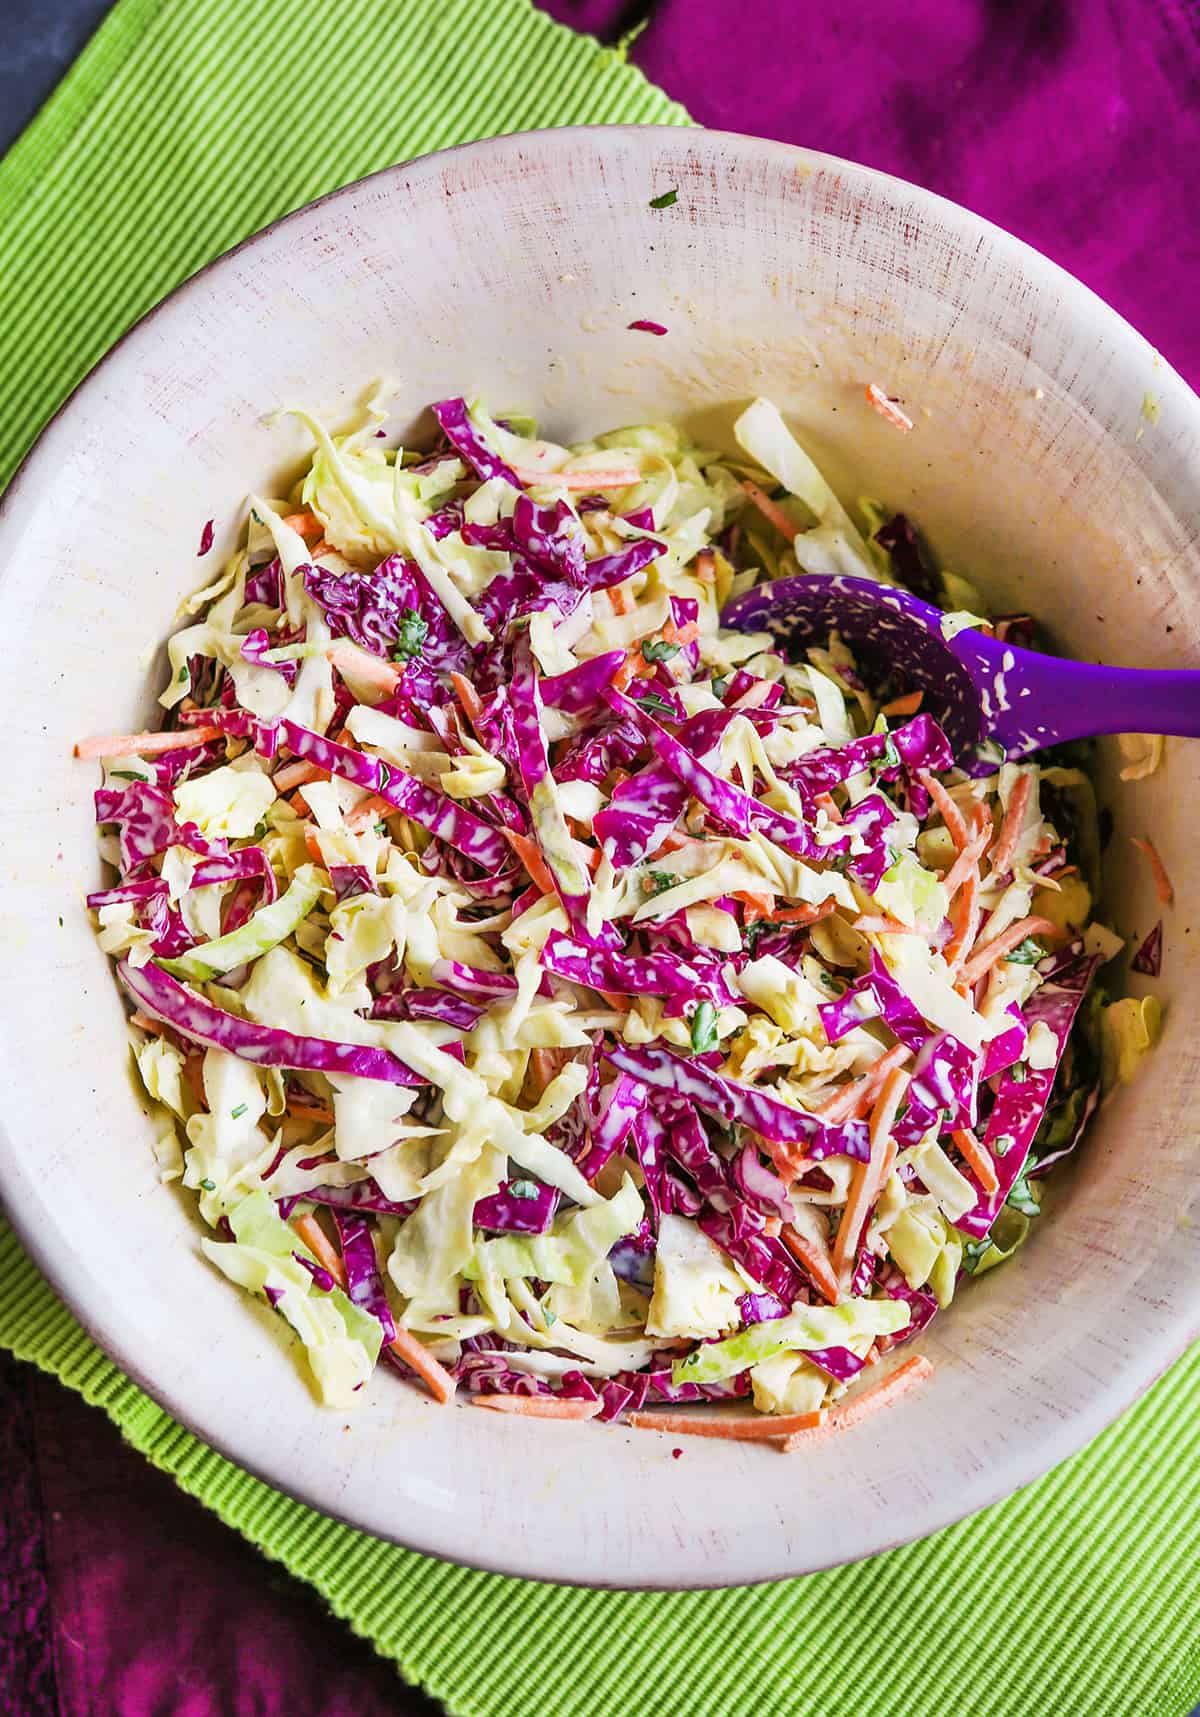 Coleslaw with apple cider vinegar in a mixing bowl with a purple spoon.